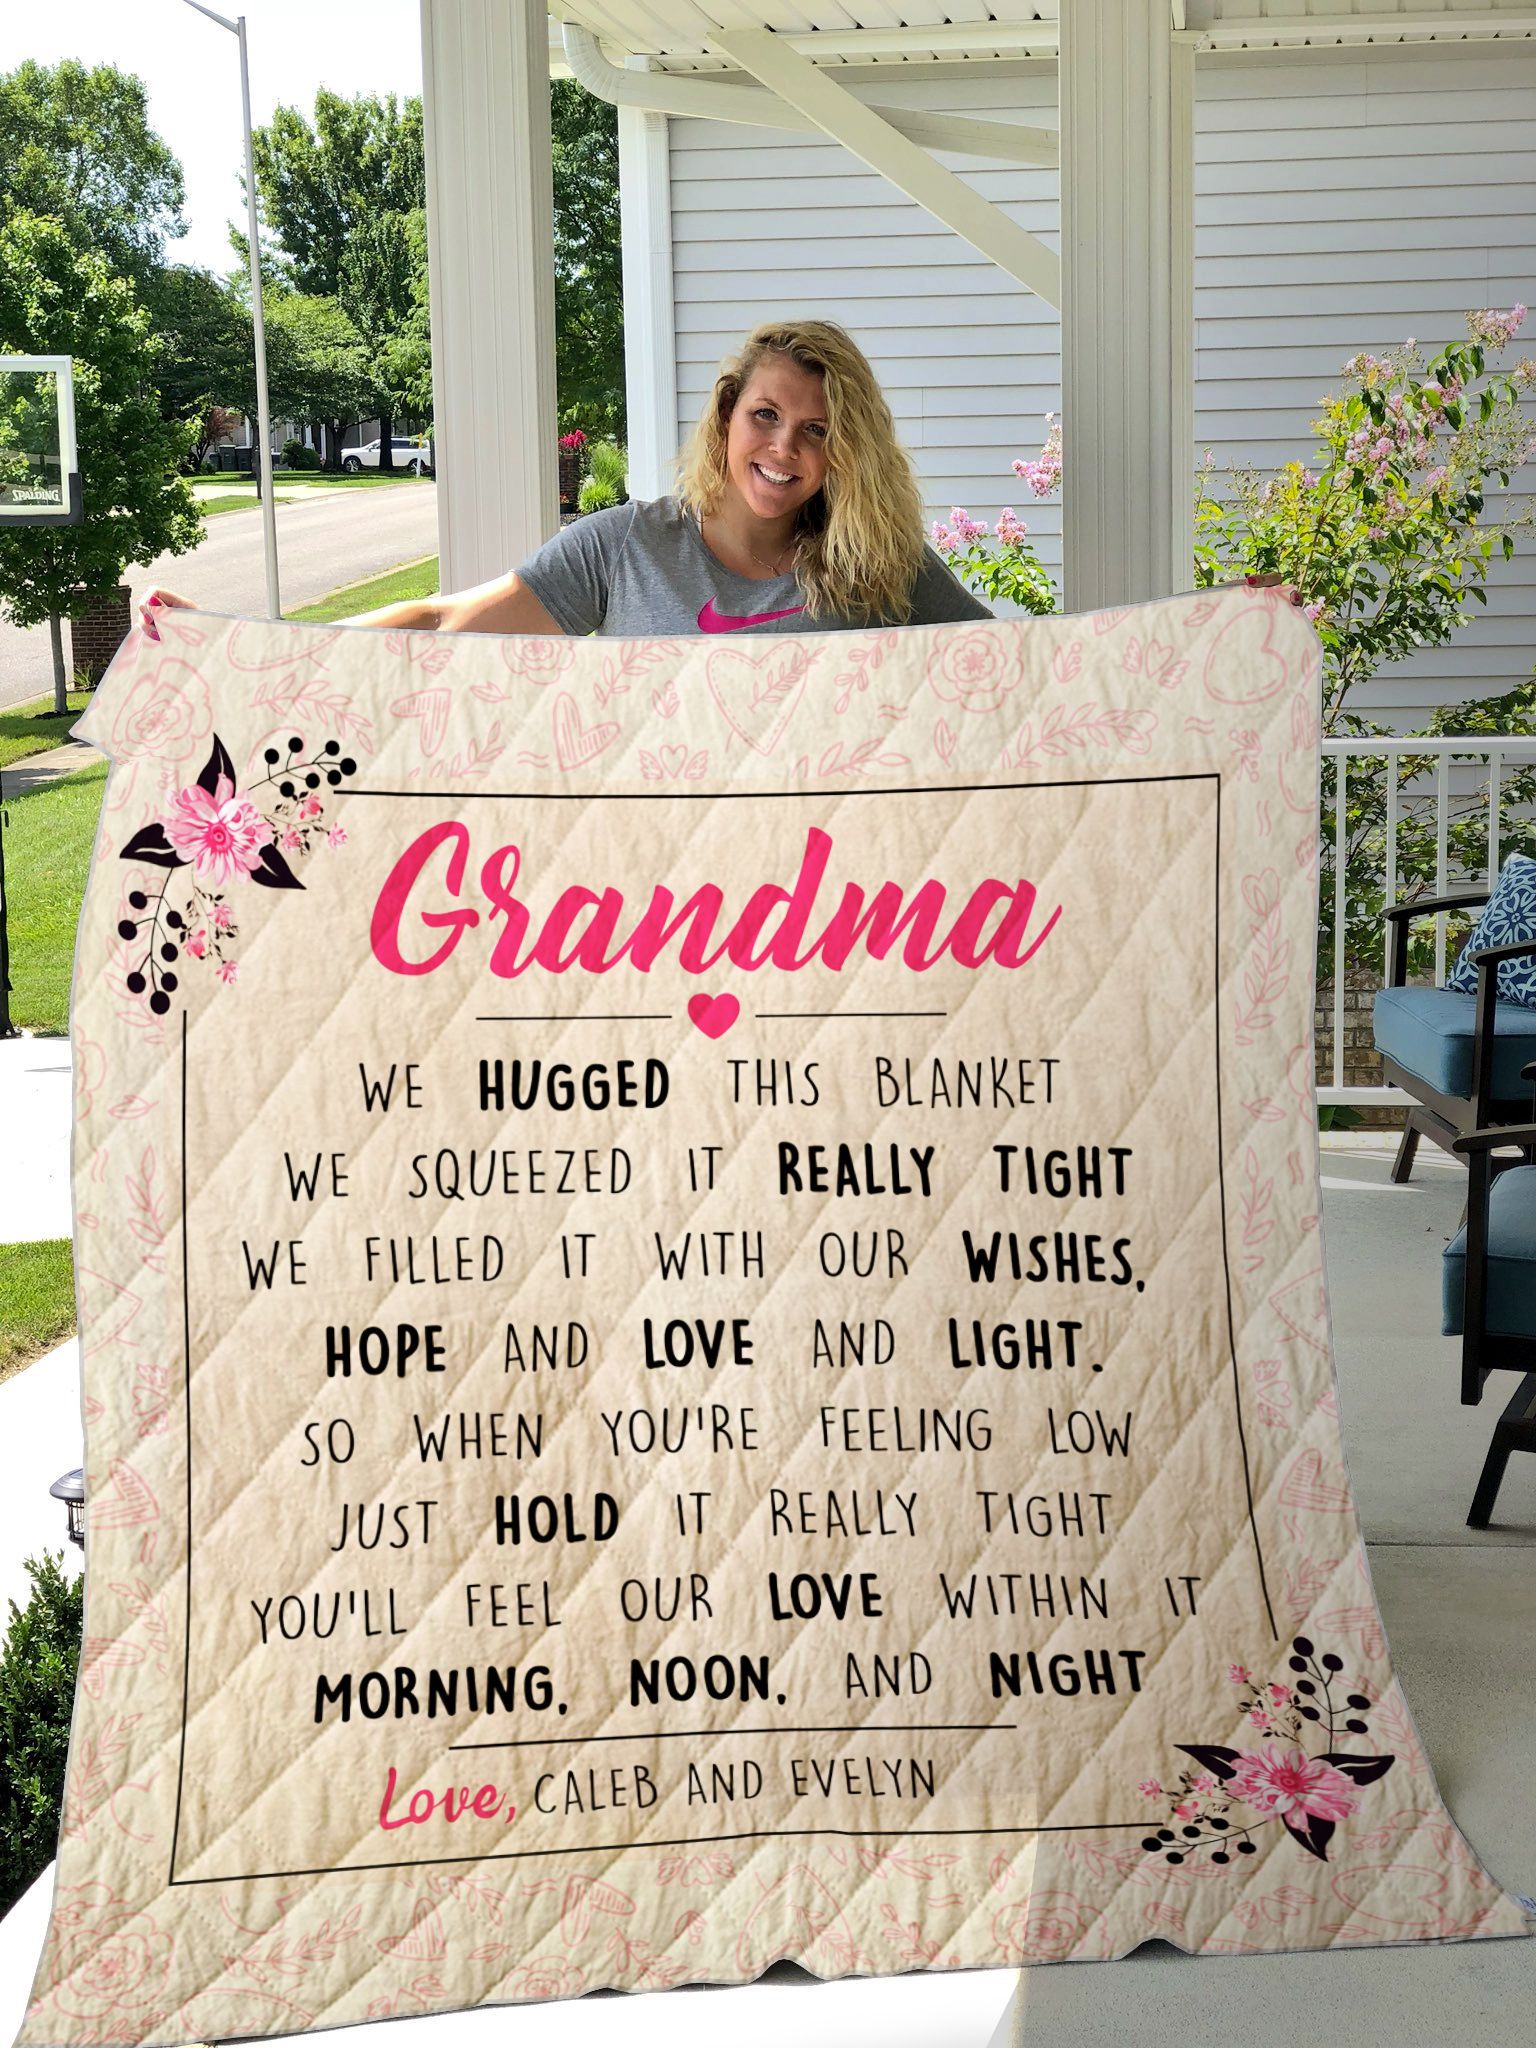 You’ll Feel Our Love Within It Morning Noon And Night Personalized Quilt Blanket